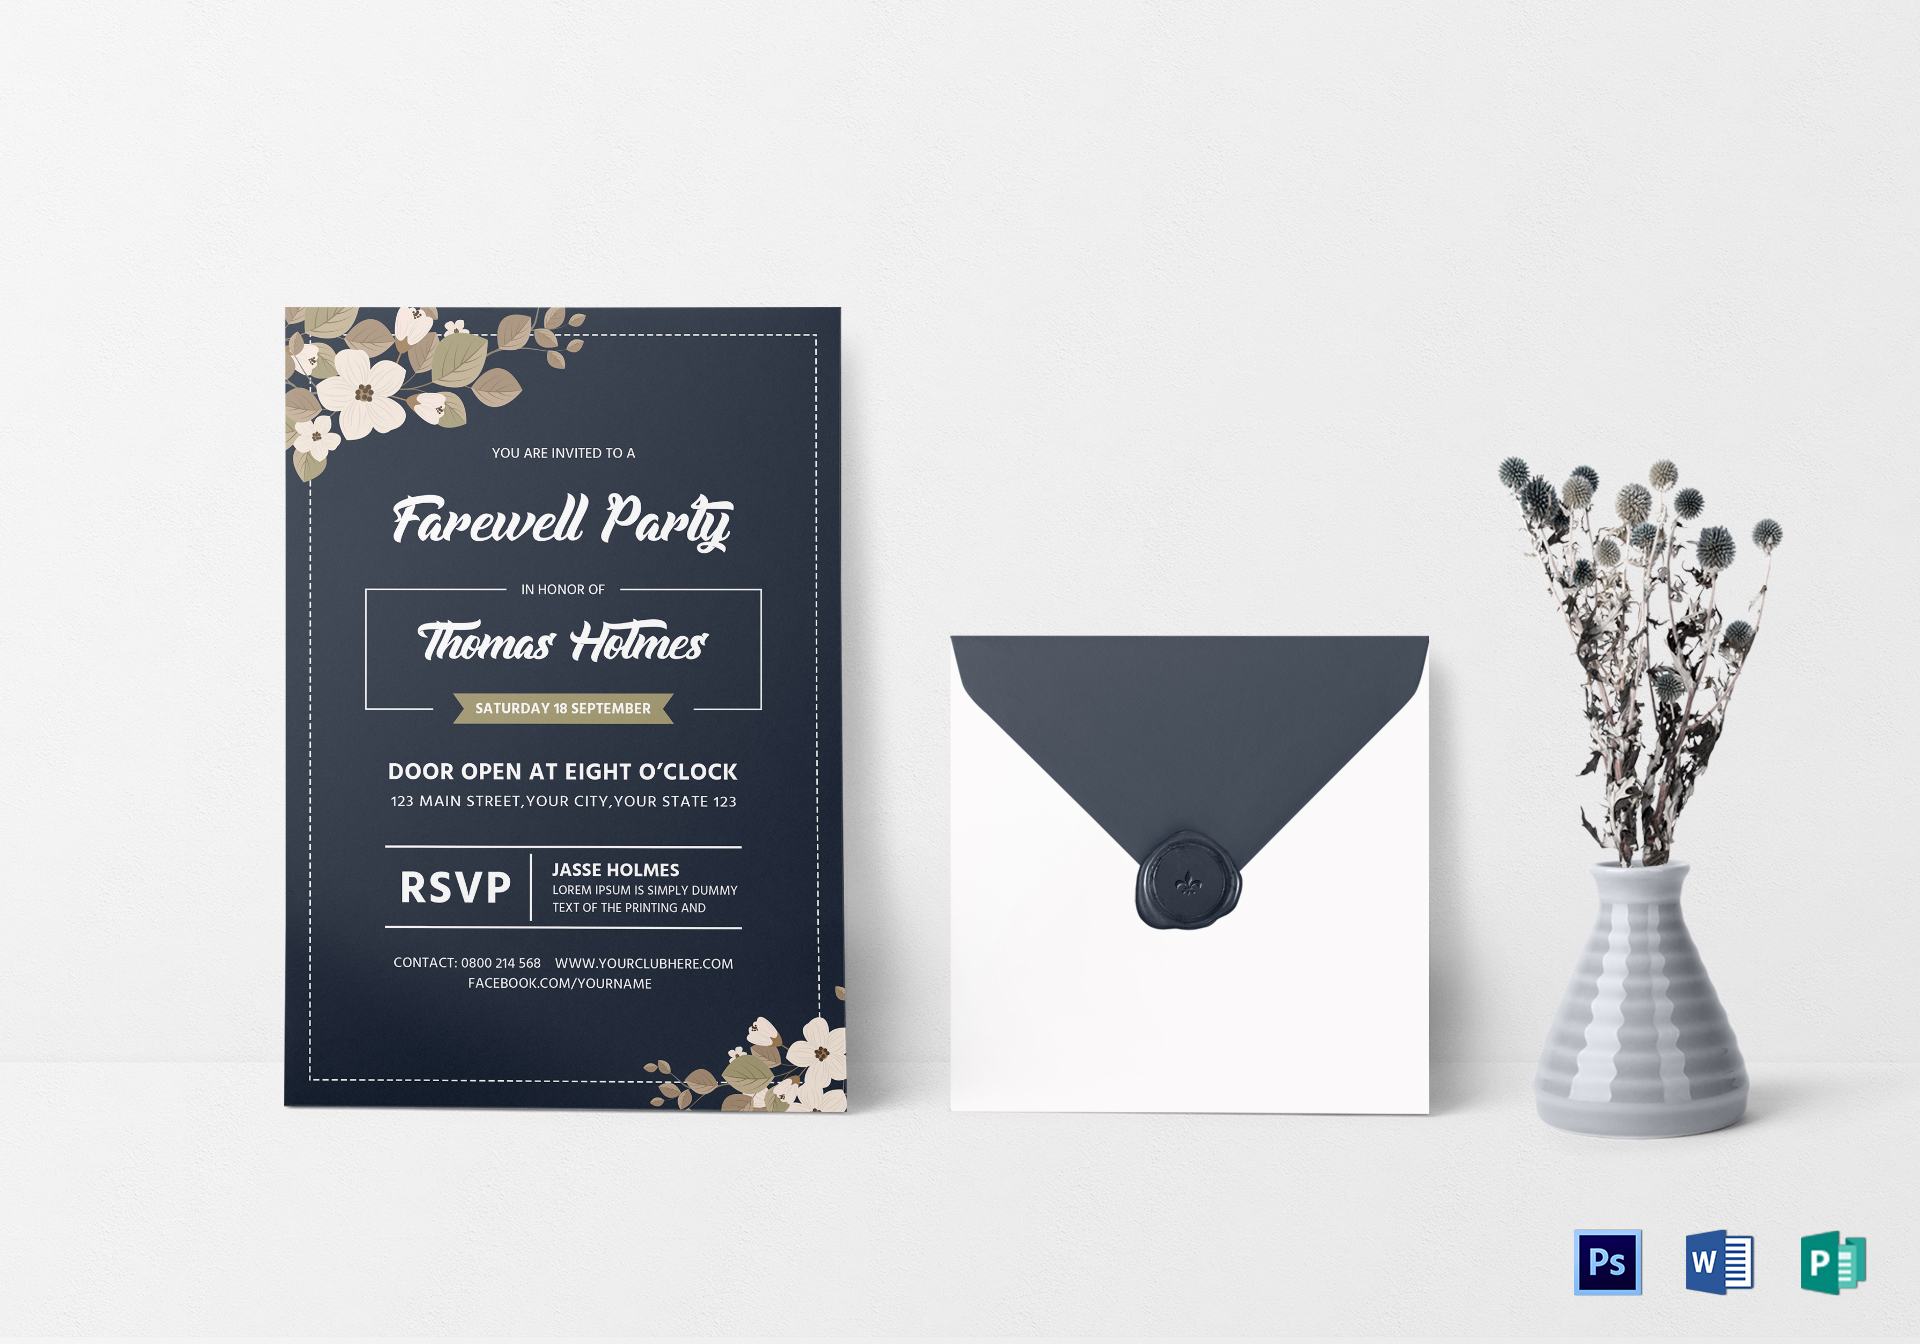 Farewell Party Invitation Card Template within measurements 1920 X 1344